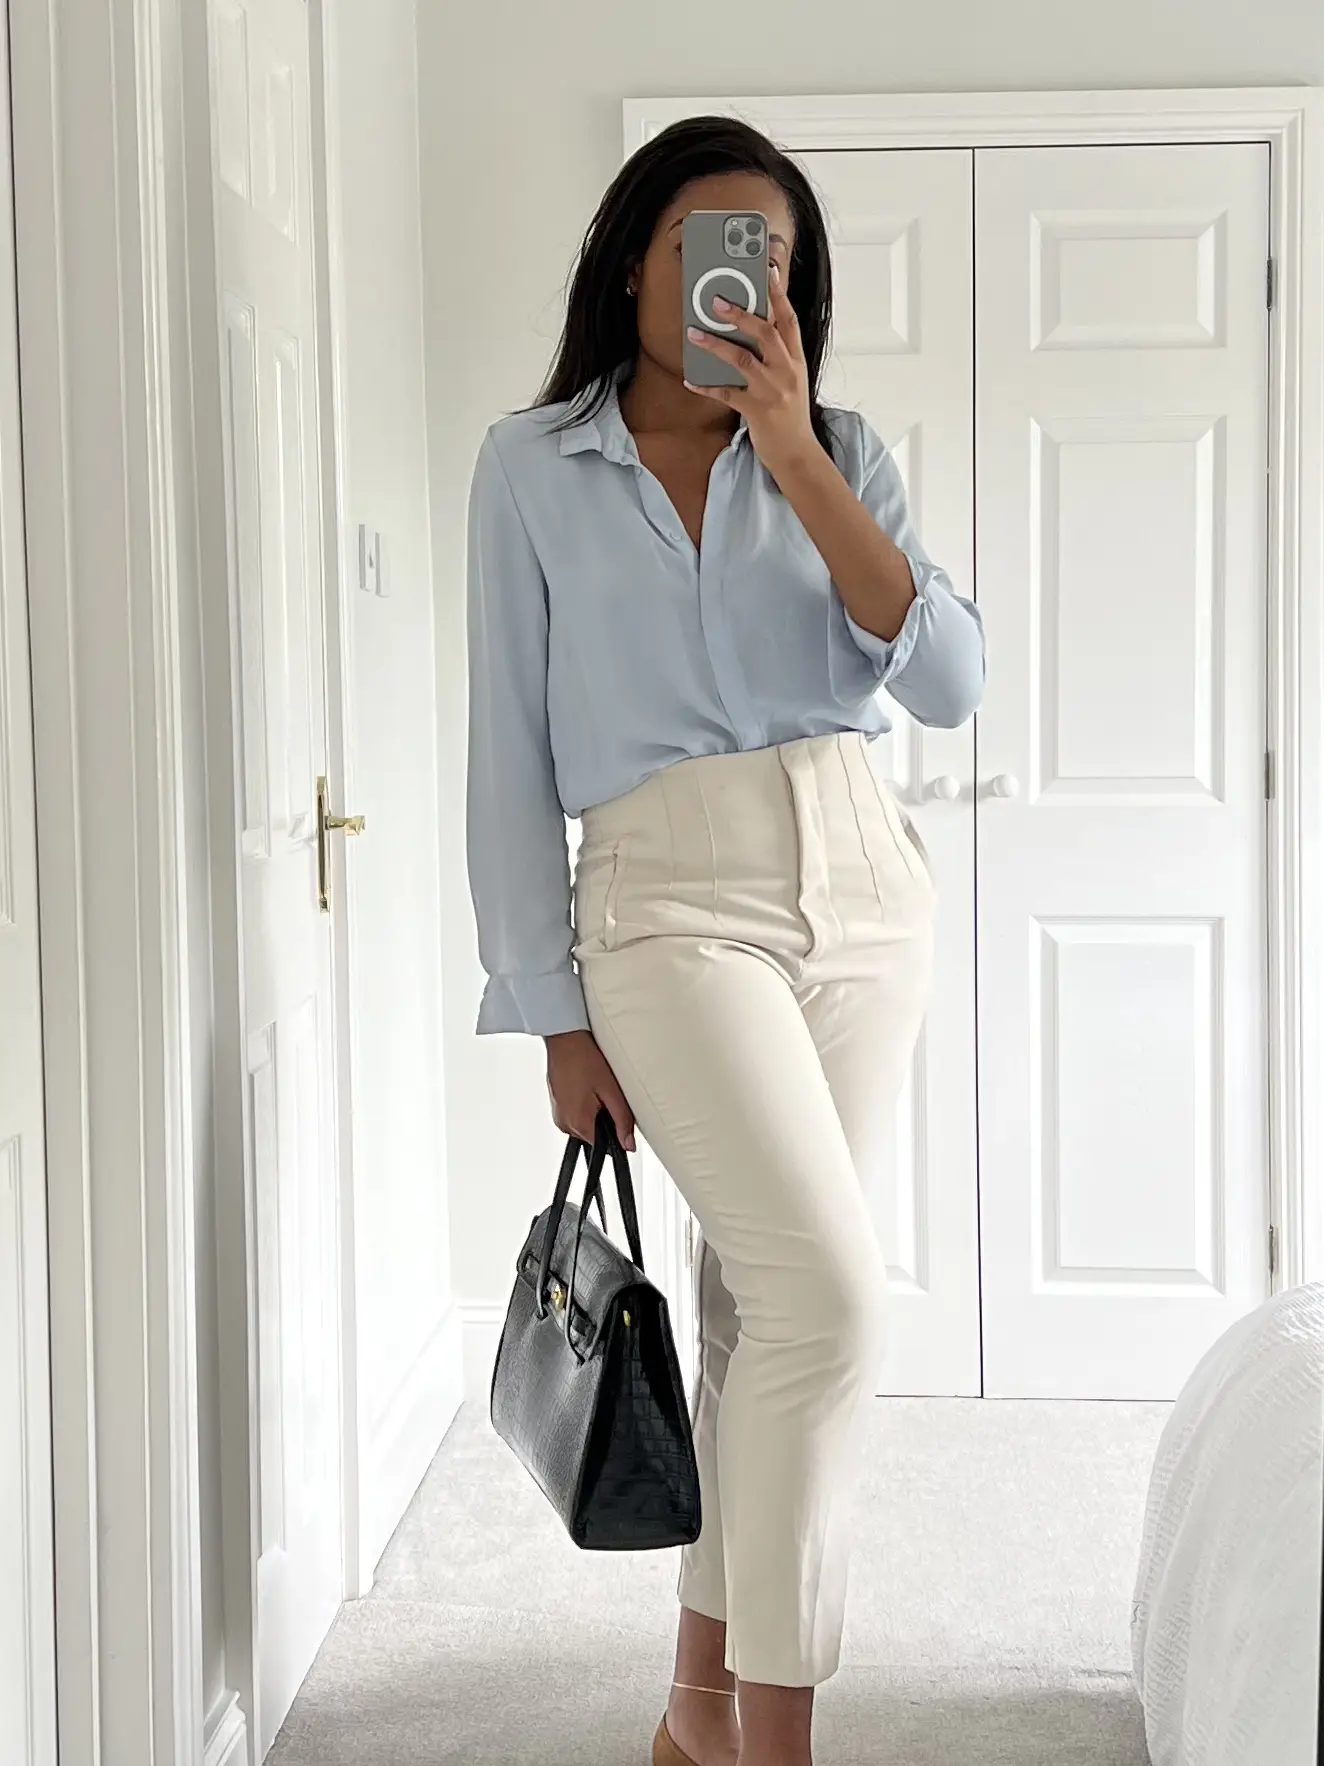 A Week in Outfits - WFH and Office outfit ideas - Lilly Style